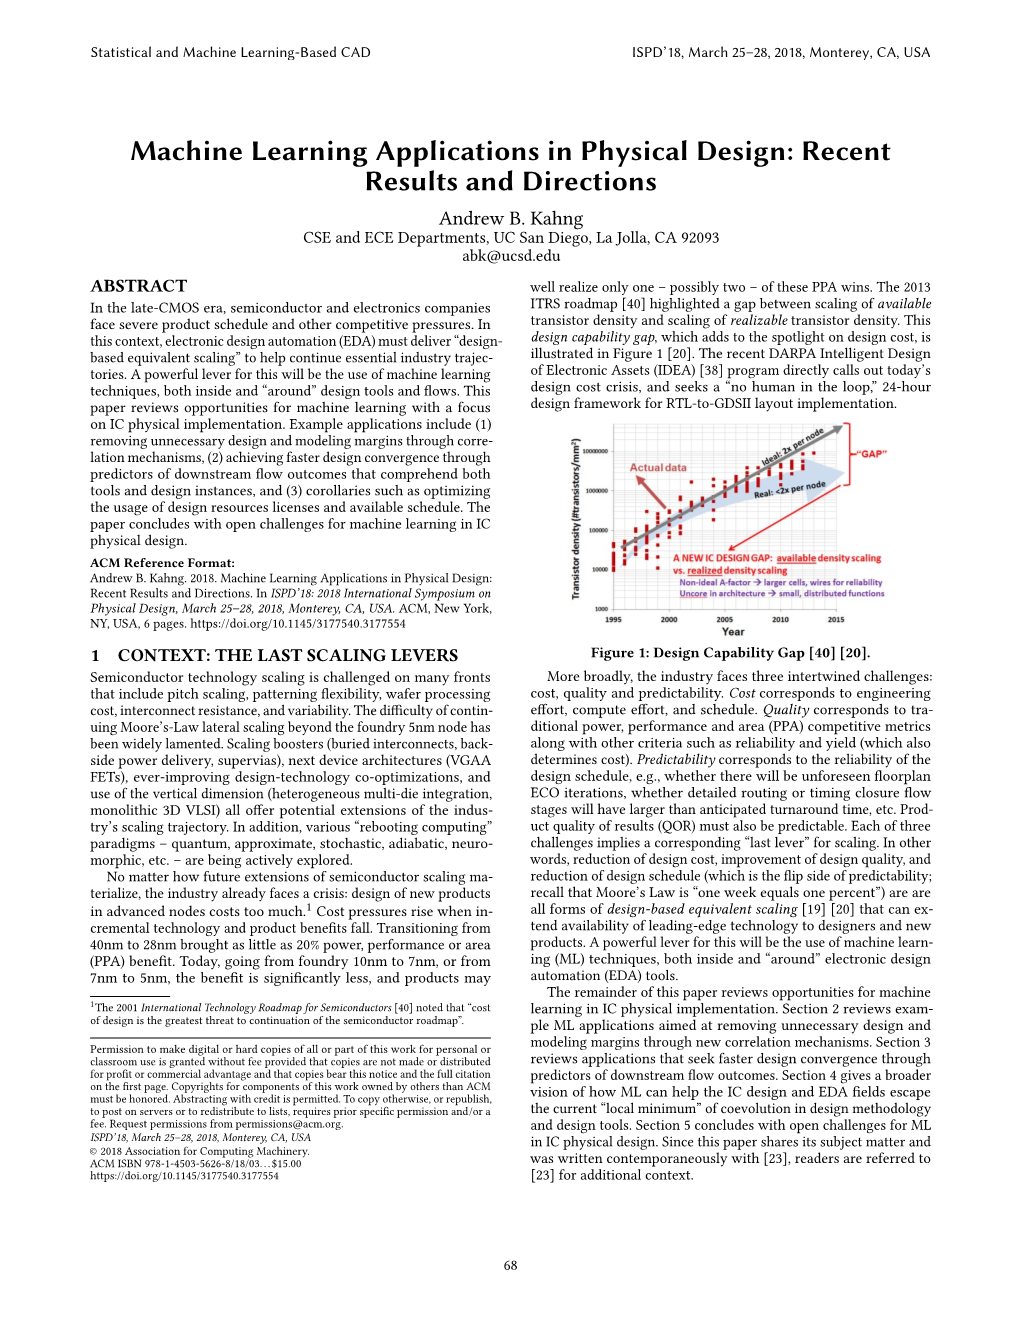 Machine Learning Applications in Physical Design: Recent Results and Directions Andrew B